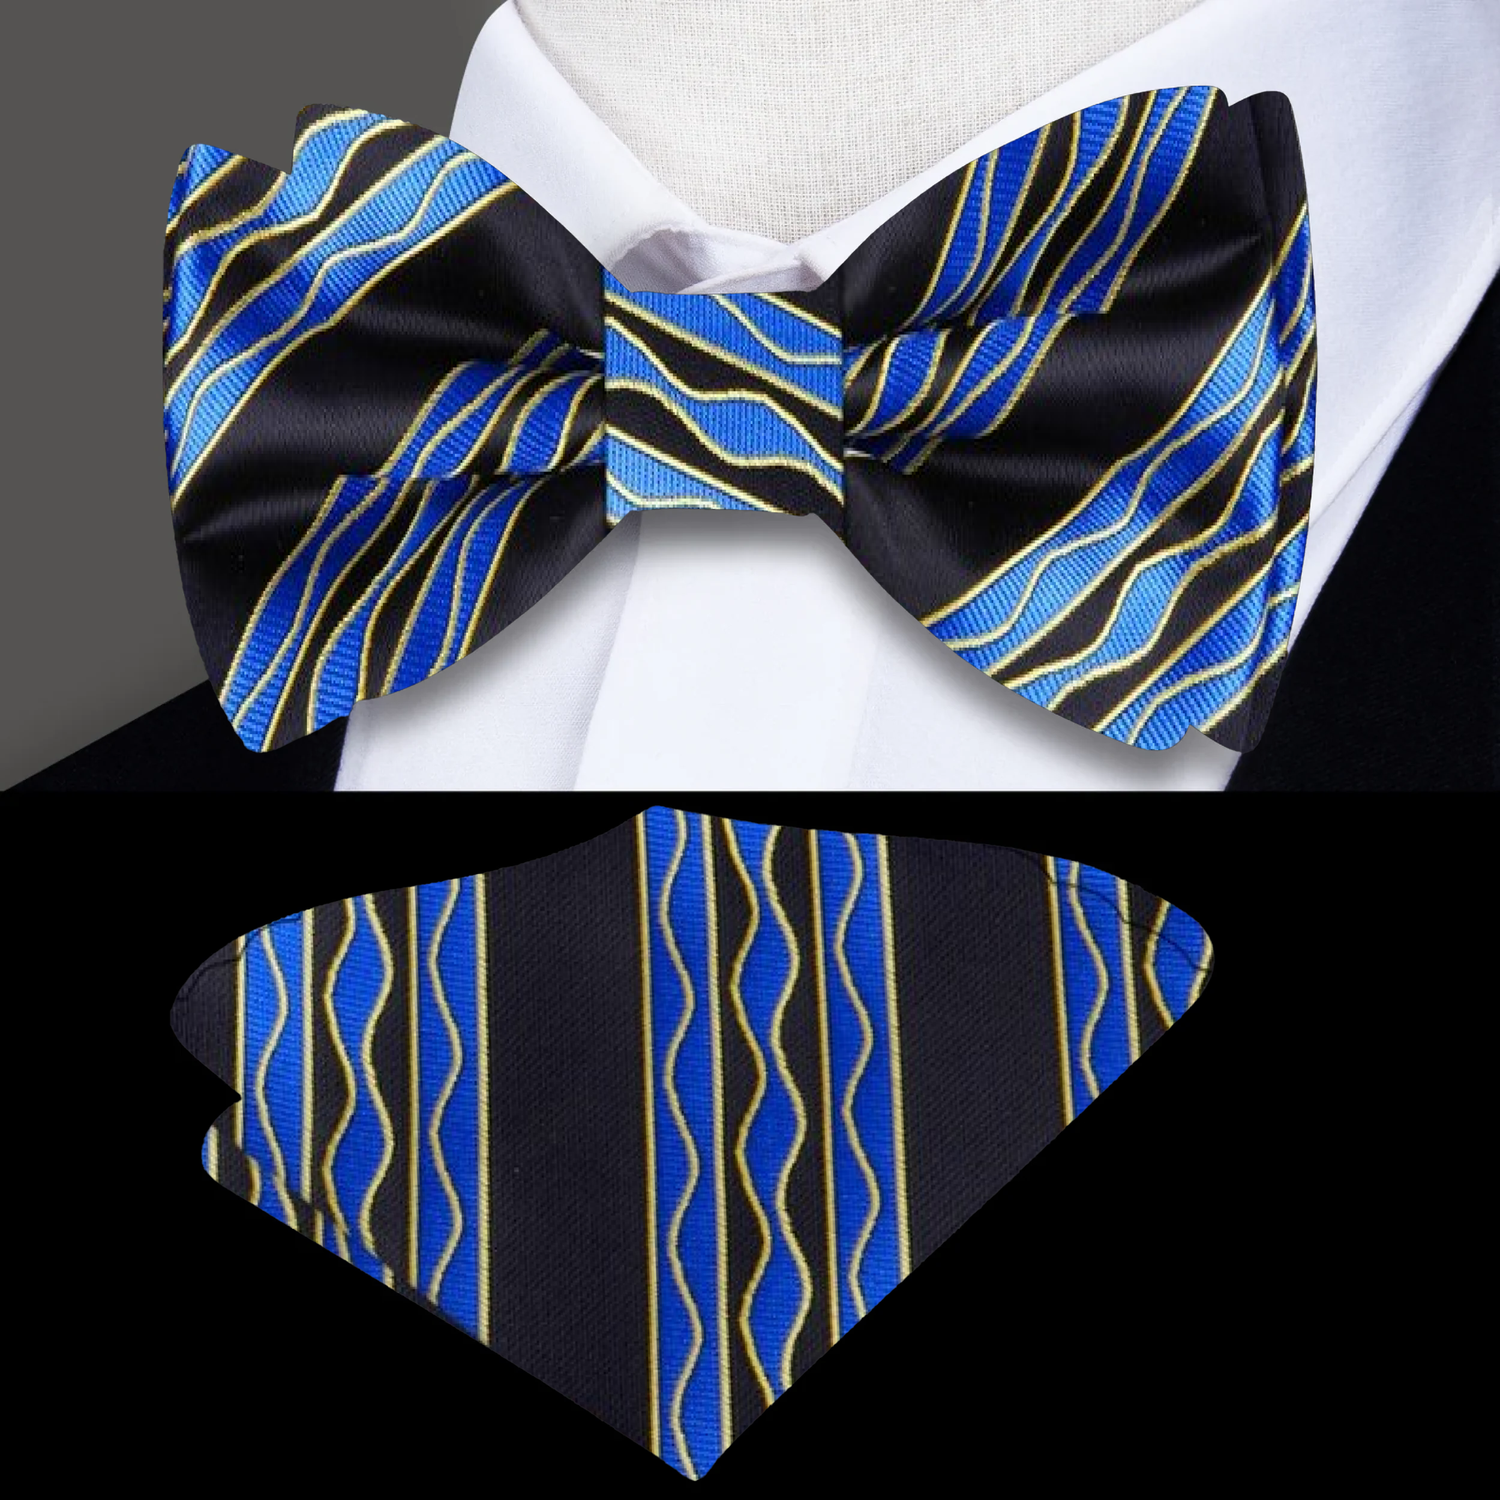 Black, Blue, Yellow Abstract Waves Bow Tie and Pocket Square on Suit||Black, Blue